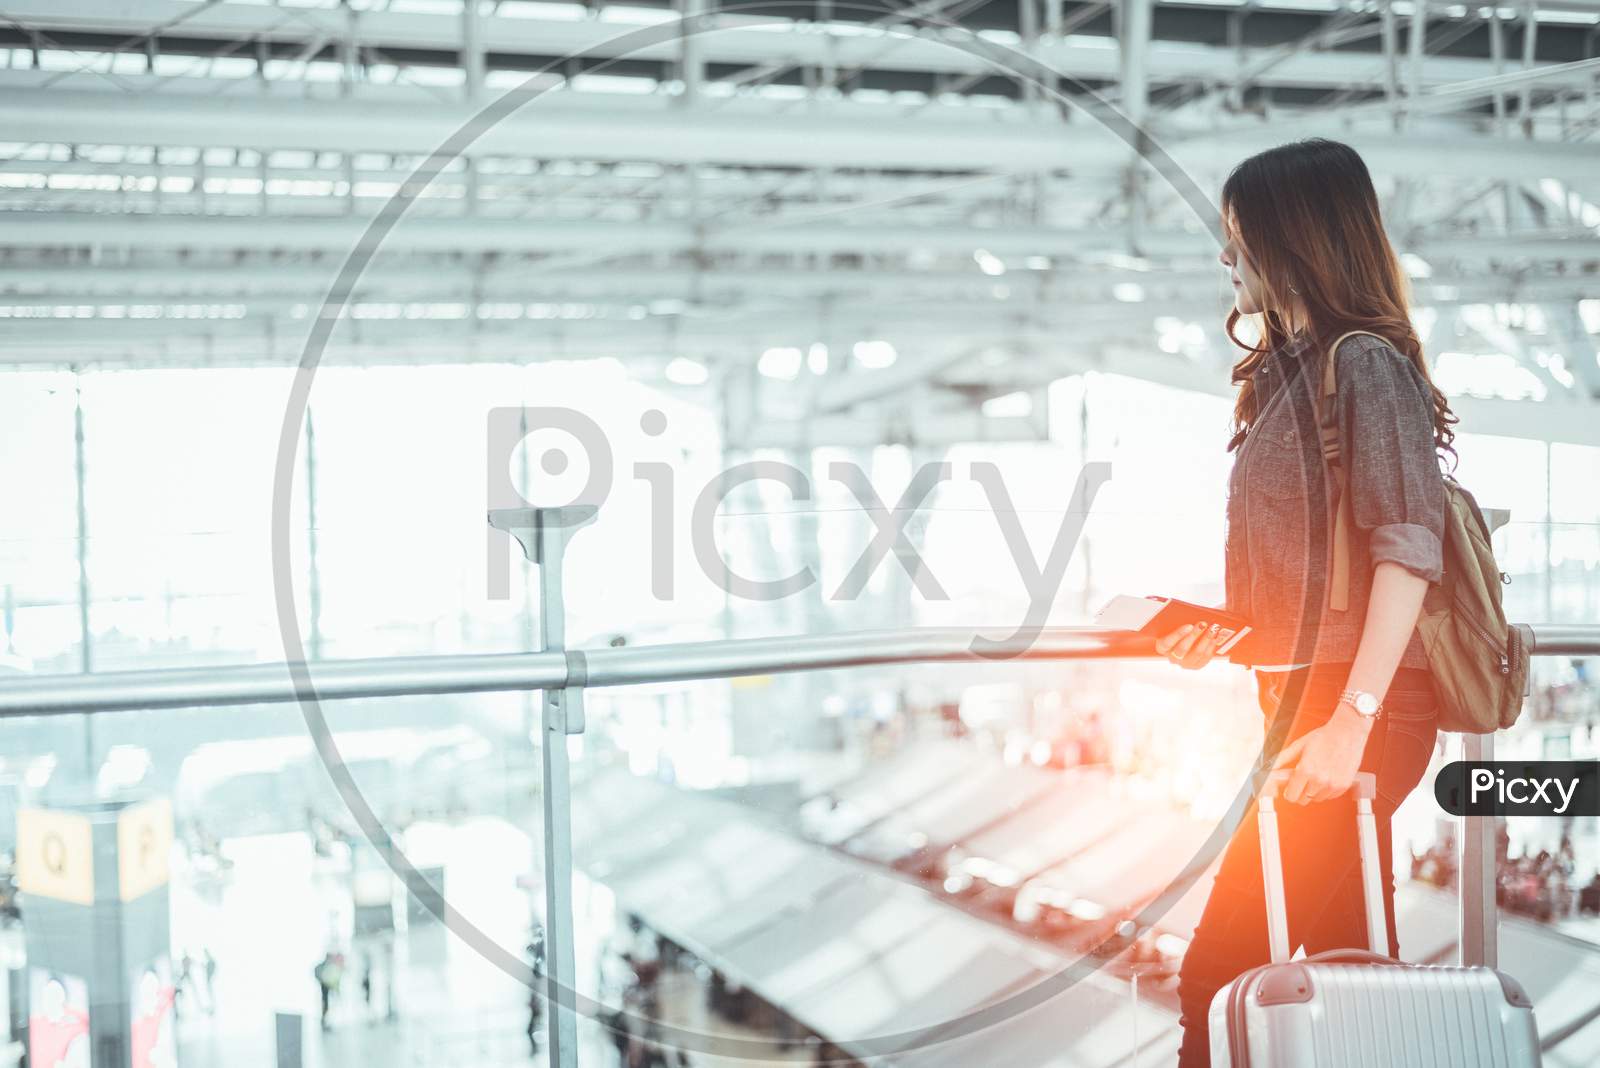 Beauty Woman Waiting For Take Off Flight In Airport. Asian Woman With Trolley Suitcase. People And Lifestyles Concept. Transportation And Travel Theme. Airplane And Train Theme.